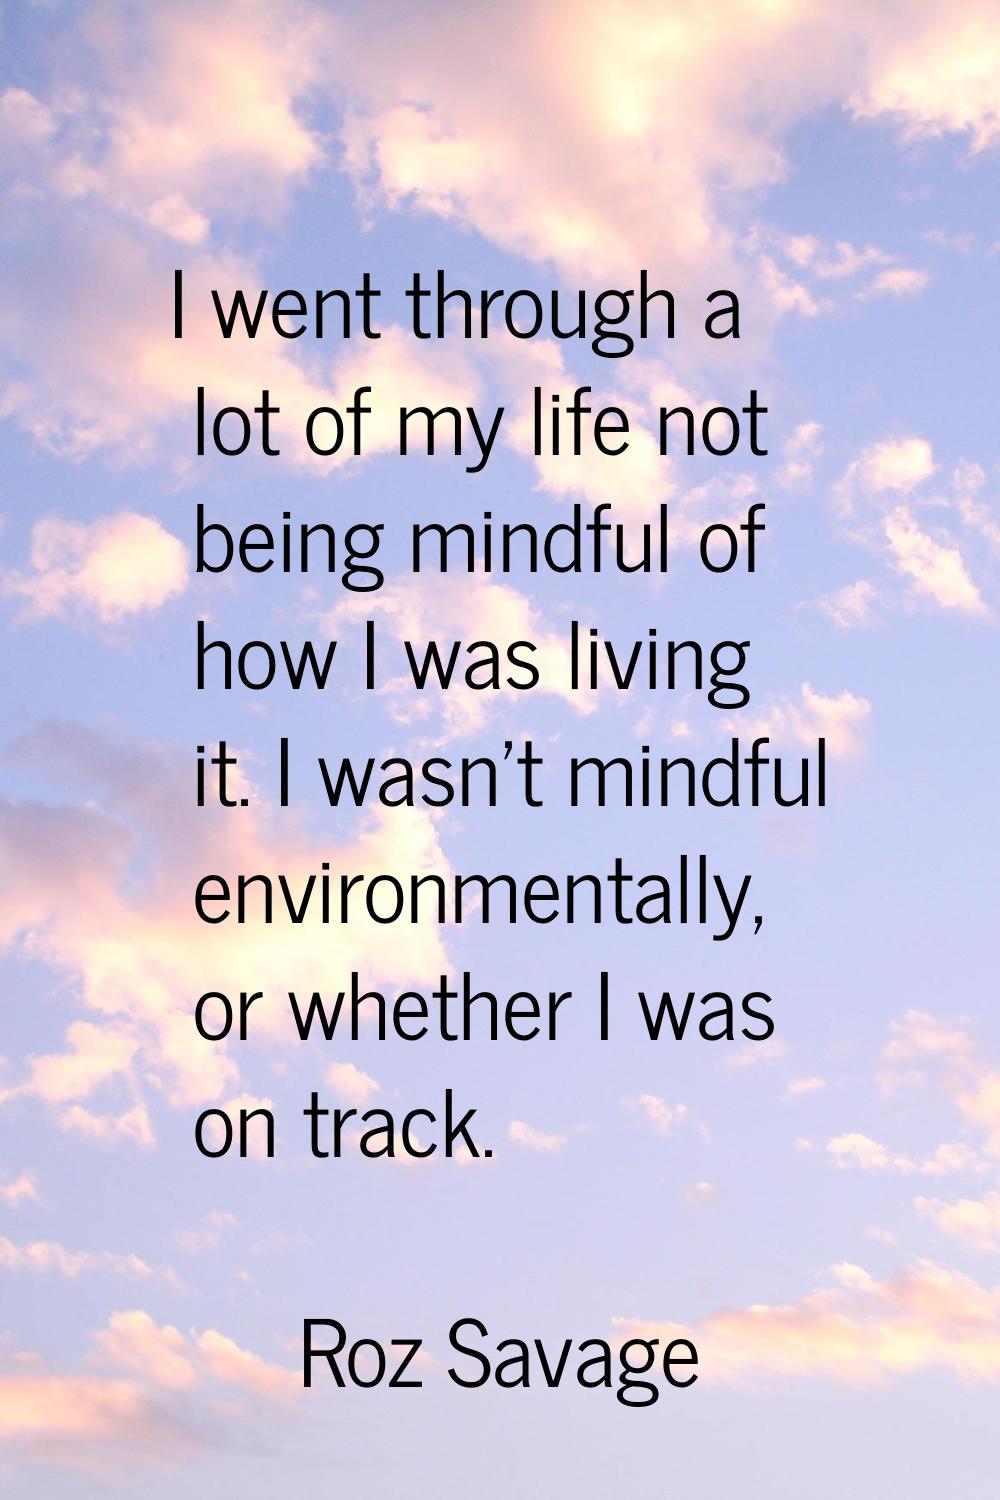 I went through a lot of my life not being mindful of how I was living it. I wasn't mindful environm